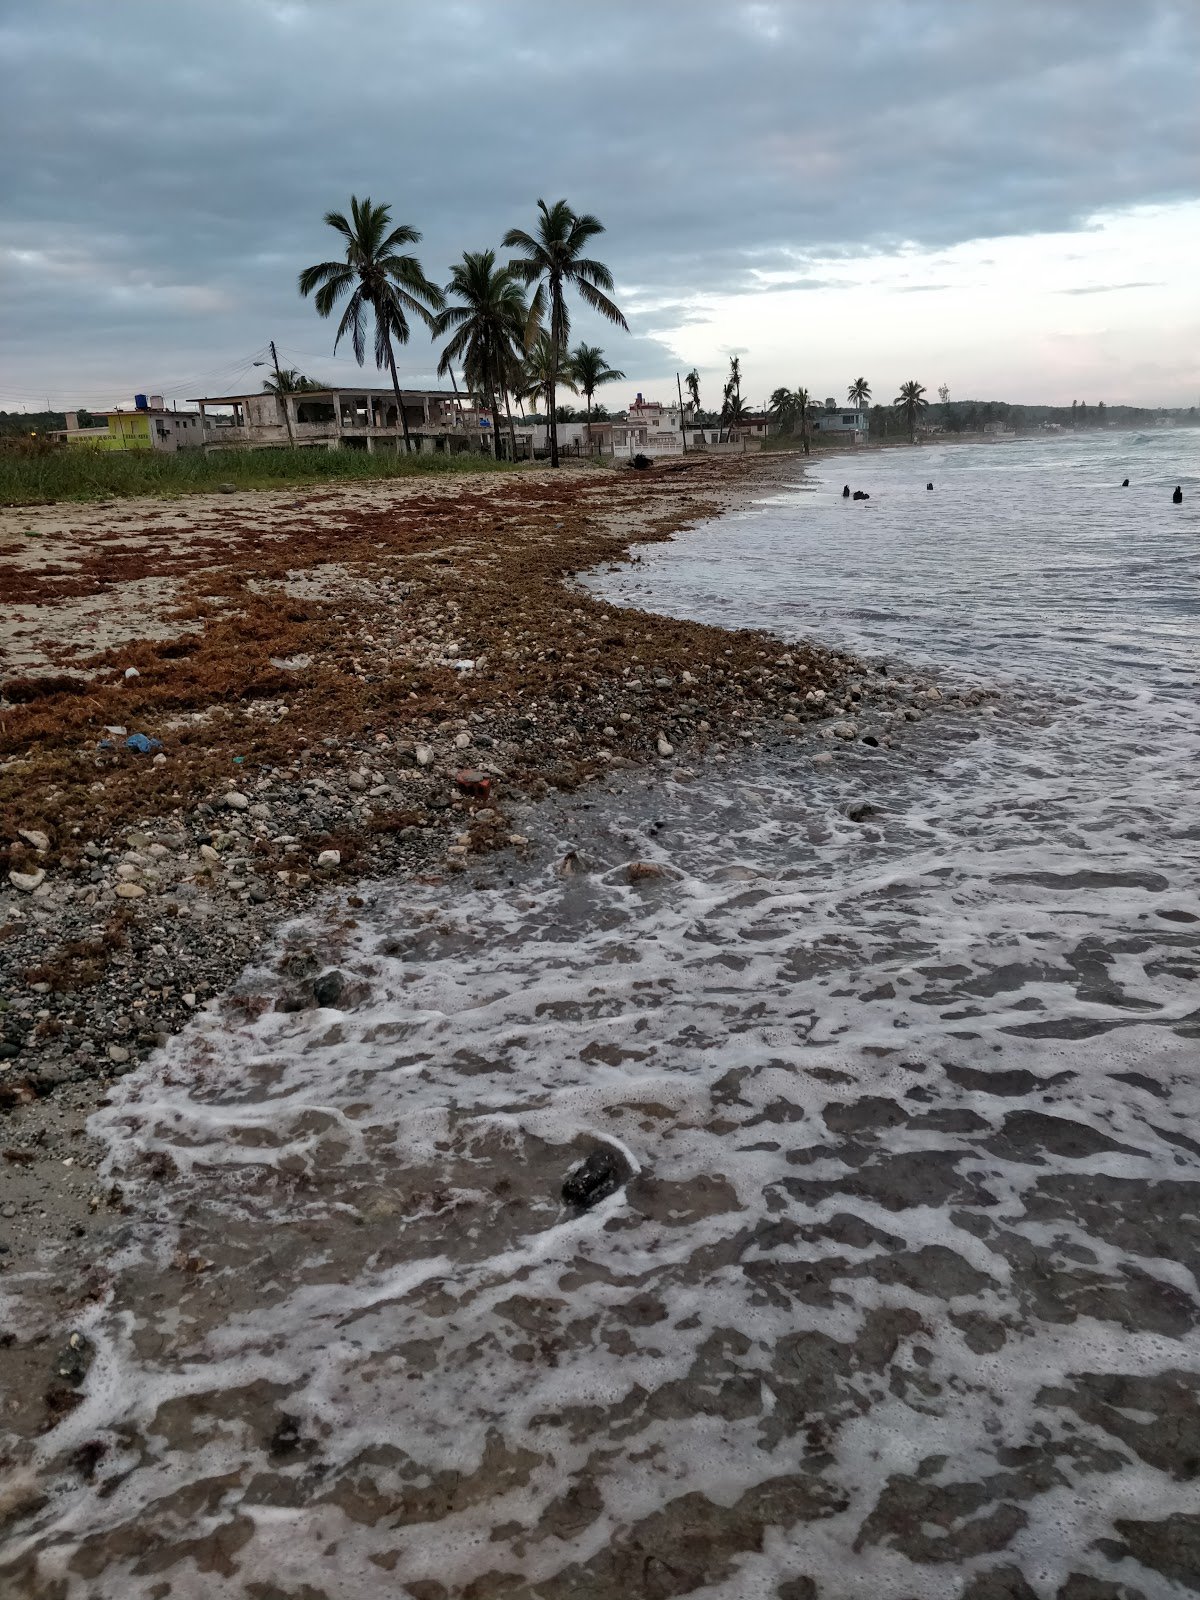 A picture of Guanabo Beach